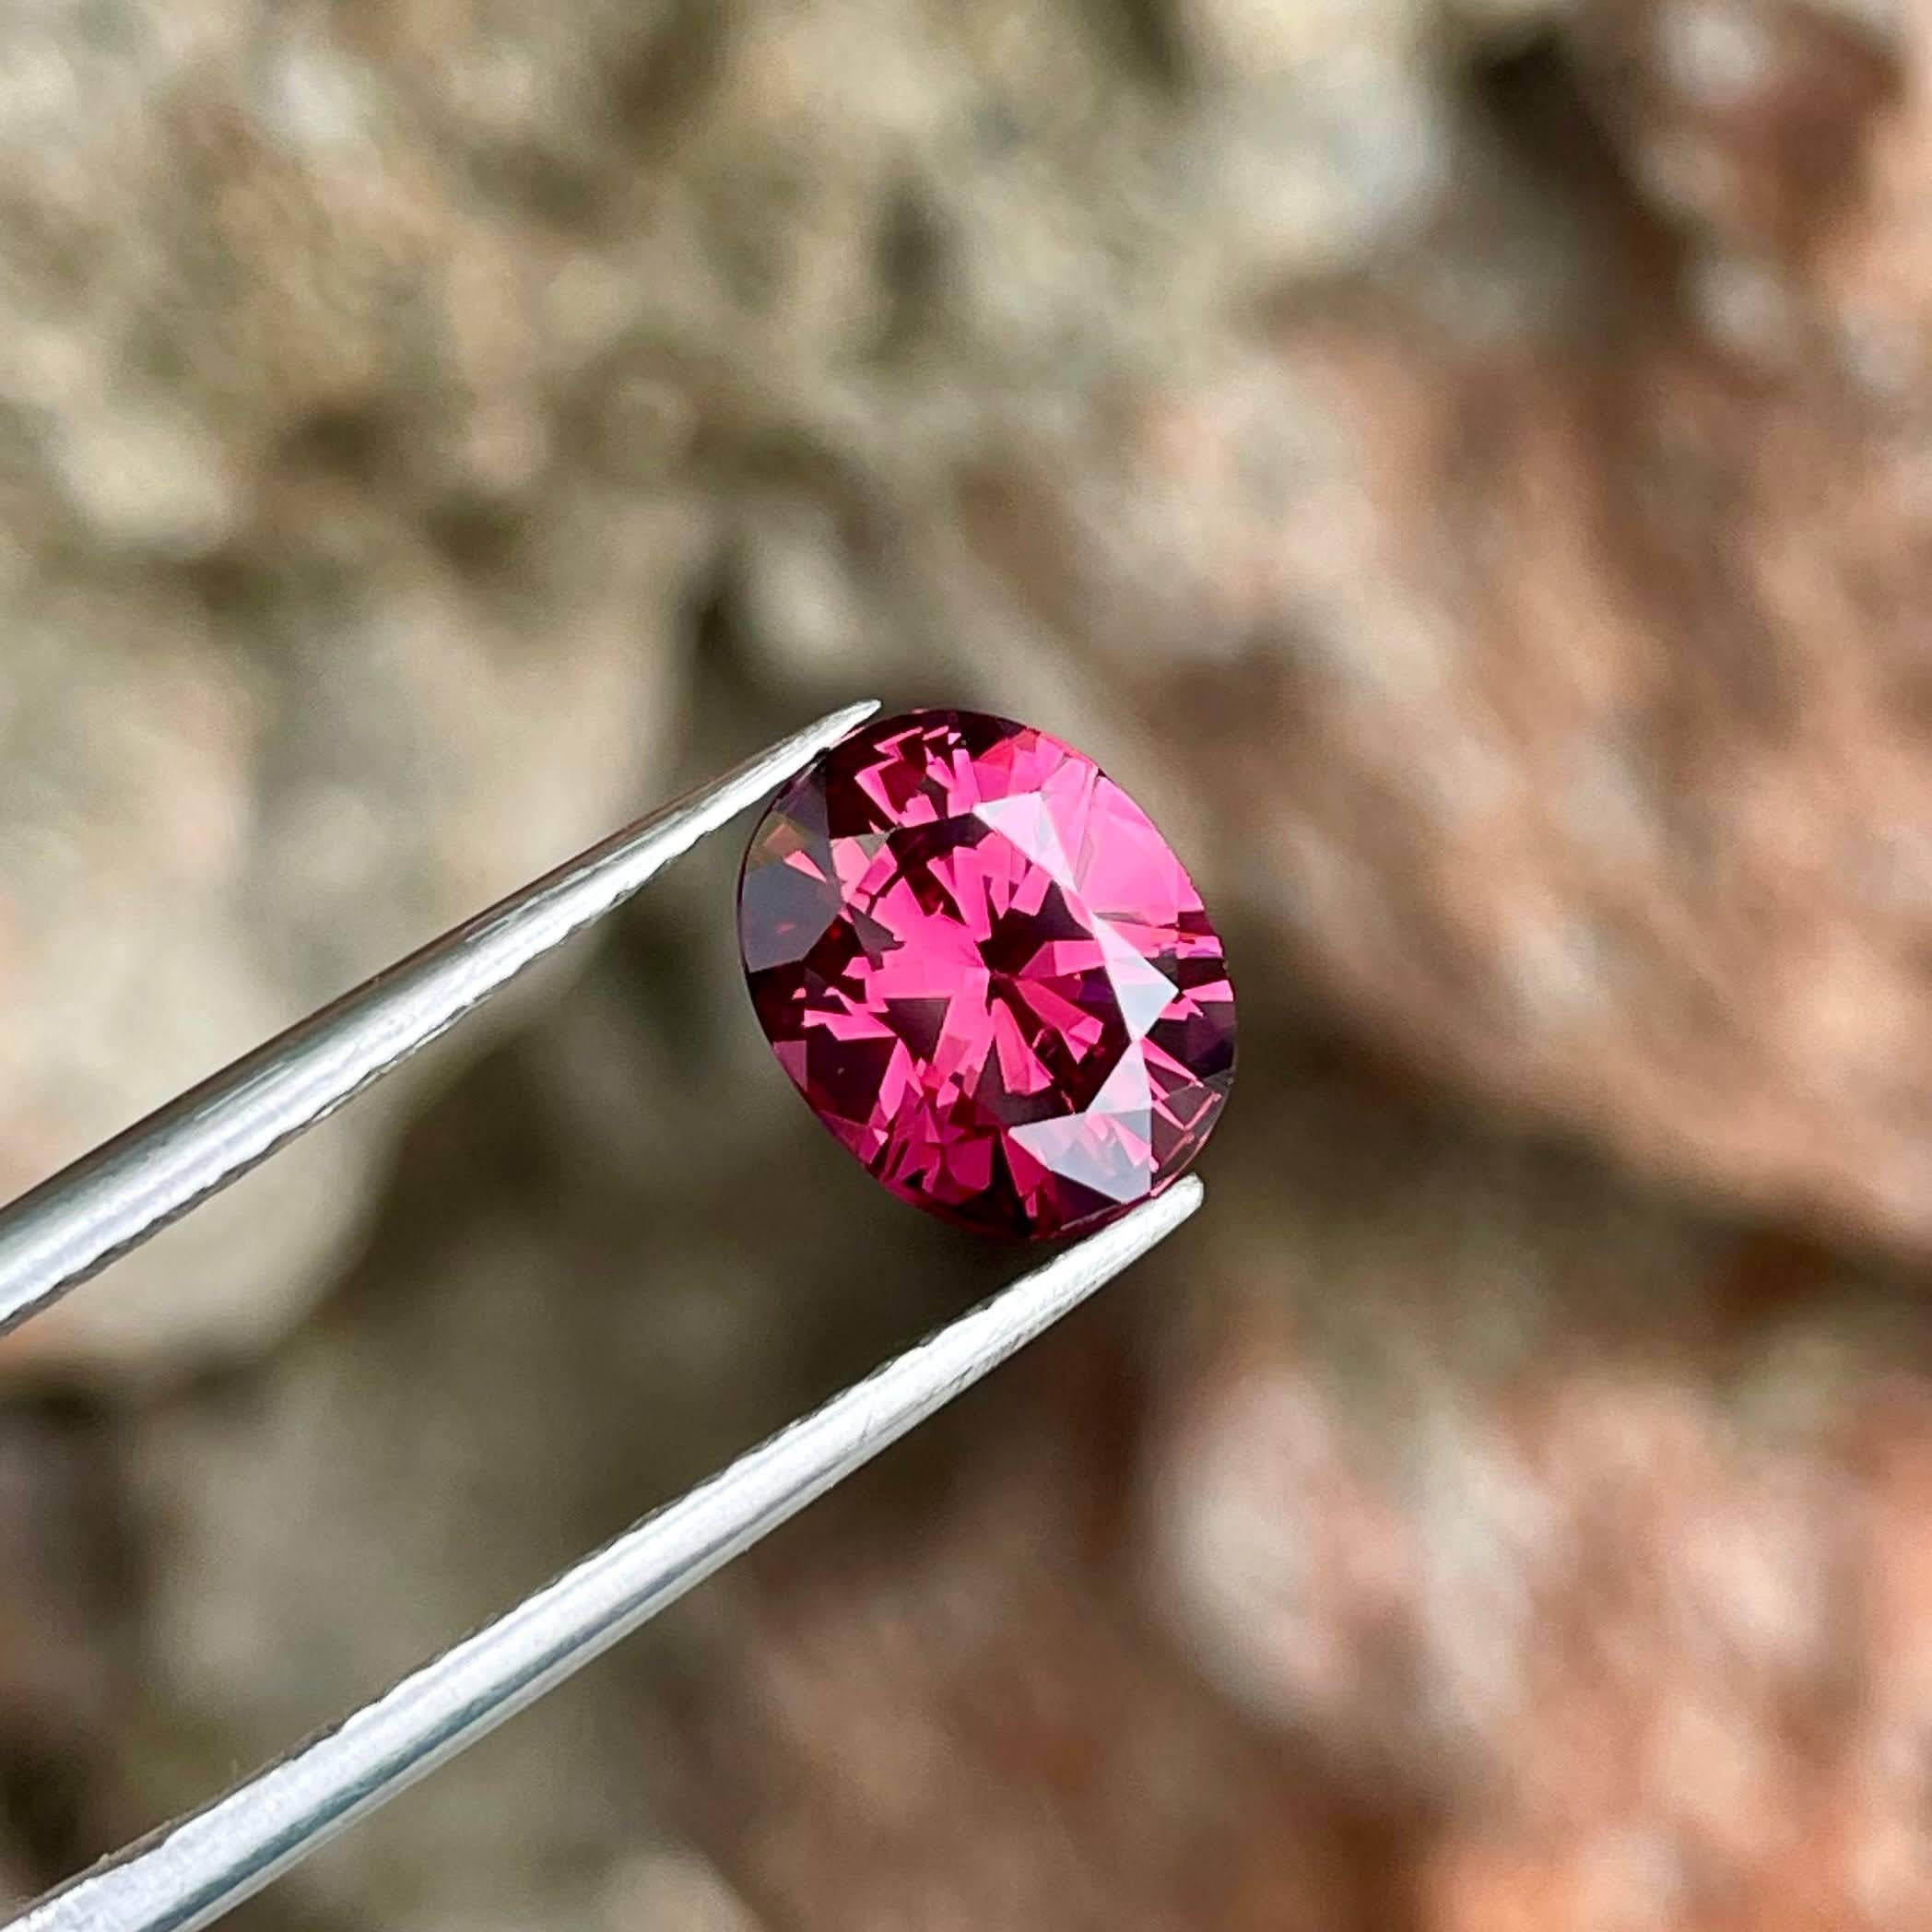 Weight 1.95 carats 
Dimensions 8.65x6.94x4.41 mm 
Treatment none 
Origin Madagascar
Clarity Vvs 
Shape oval 
Cut fancy oval 




The Deep Pink Garnet Stone is a radiant gem of exquisite beauty, boasting a weighty 1.95 carats. Cut into a mesmerizing